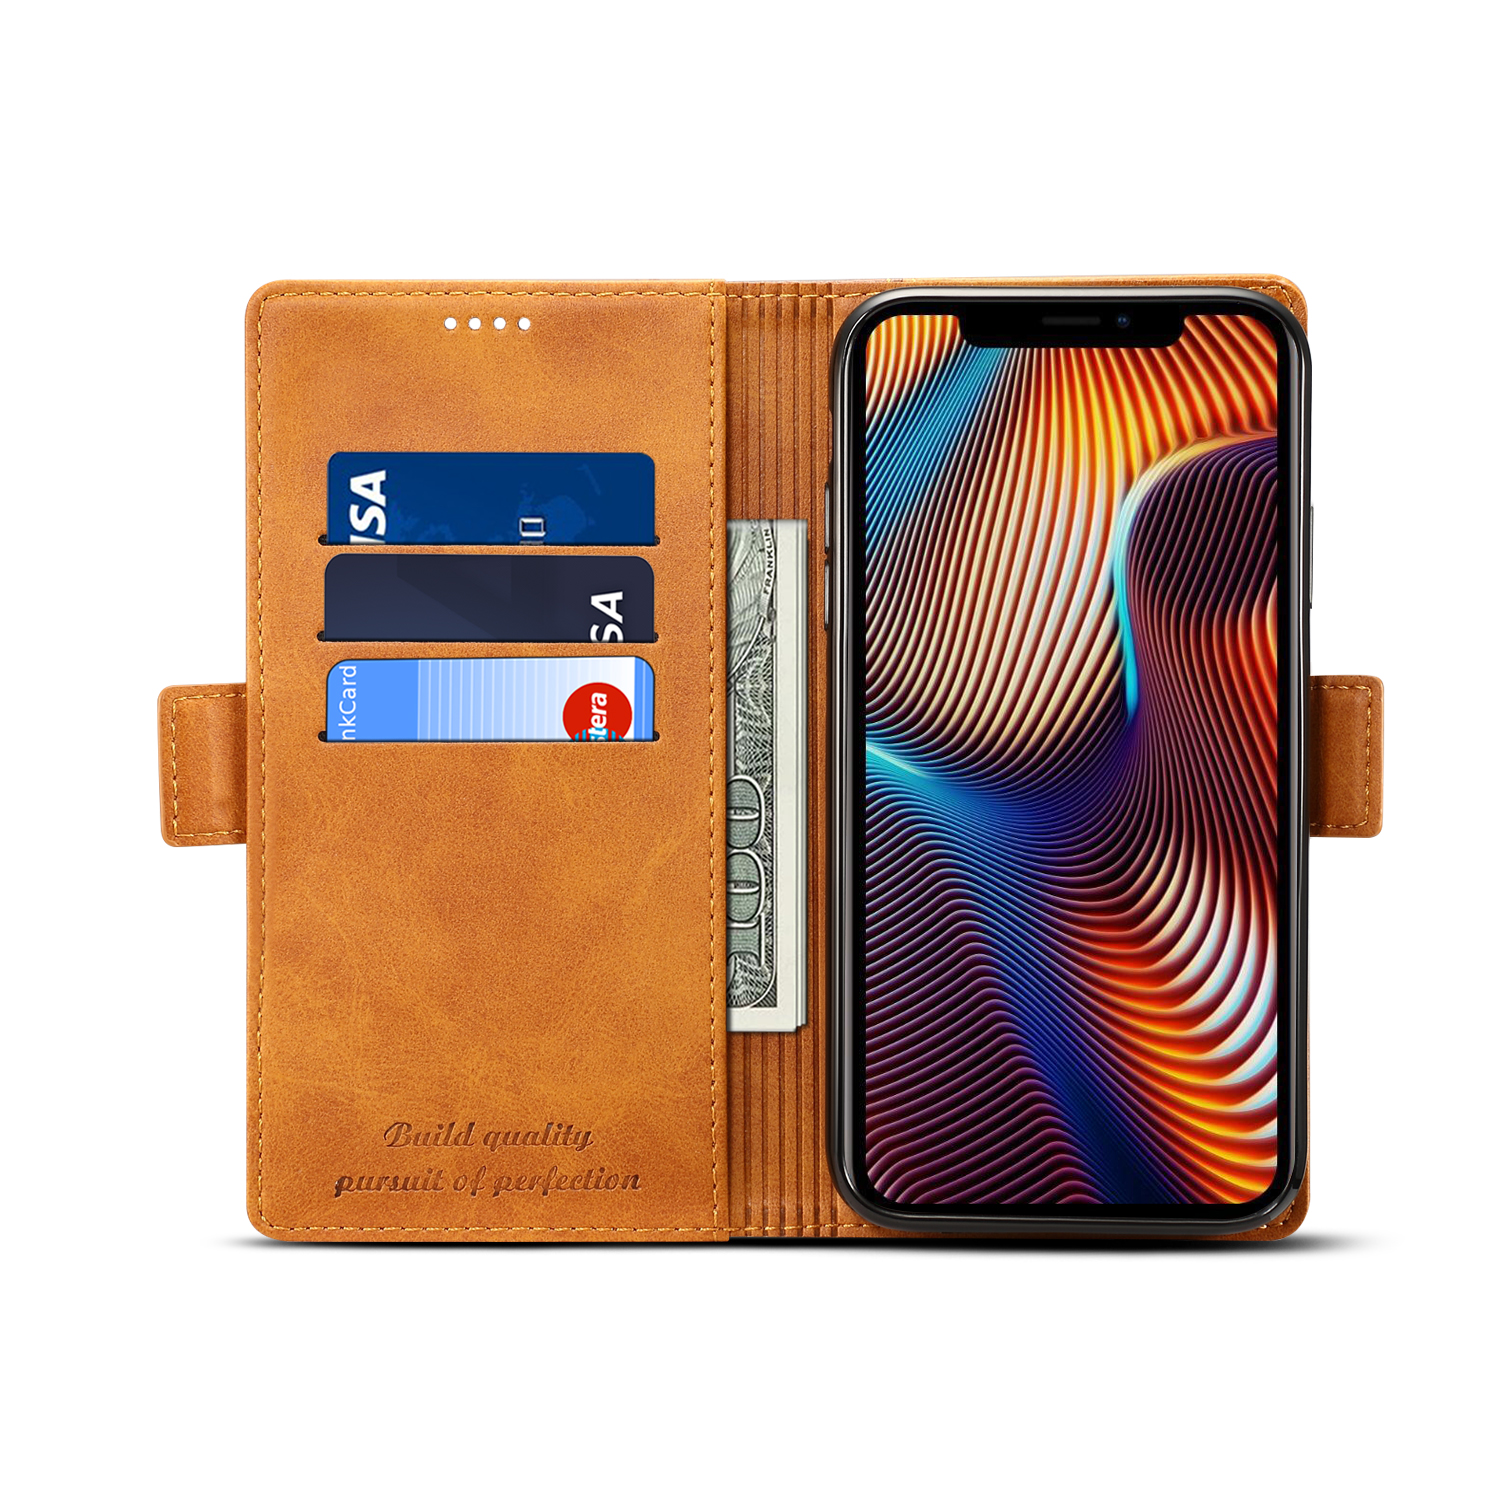 Bakeey-Hybrid-Color-Wallet-Card-Sots-Kickstand-Protective-Case-For-iPhone-XR-1380898